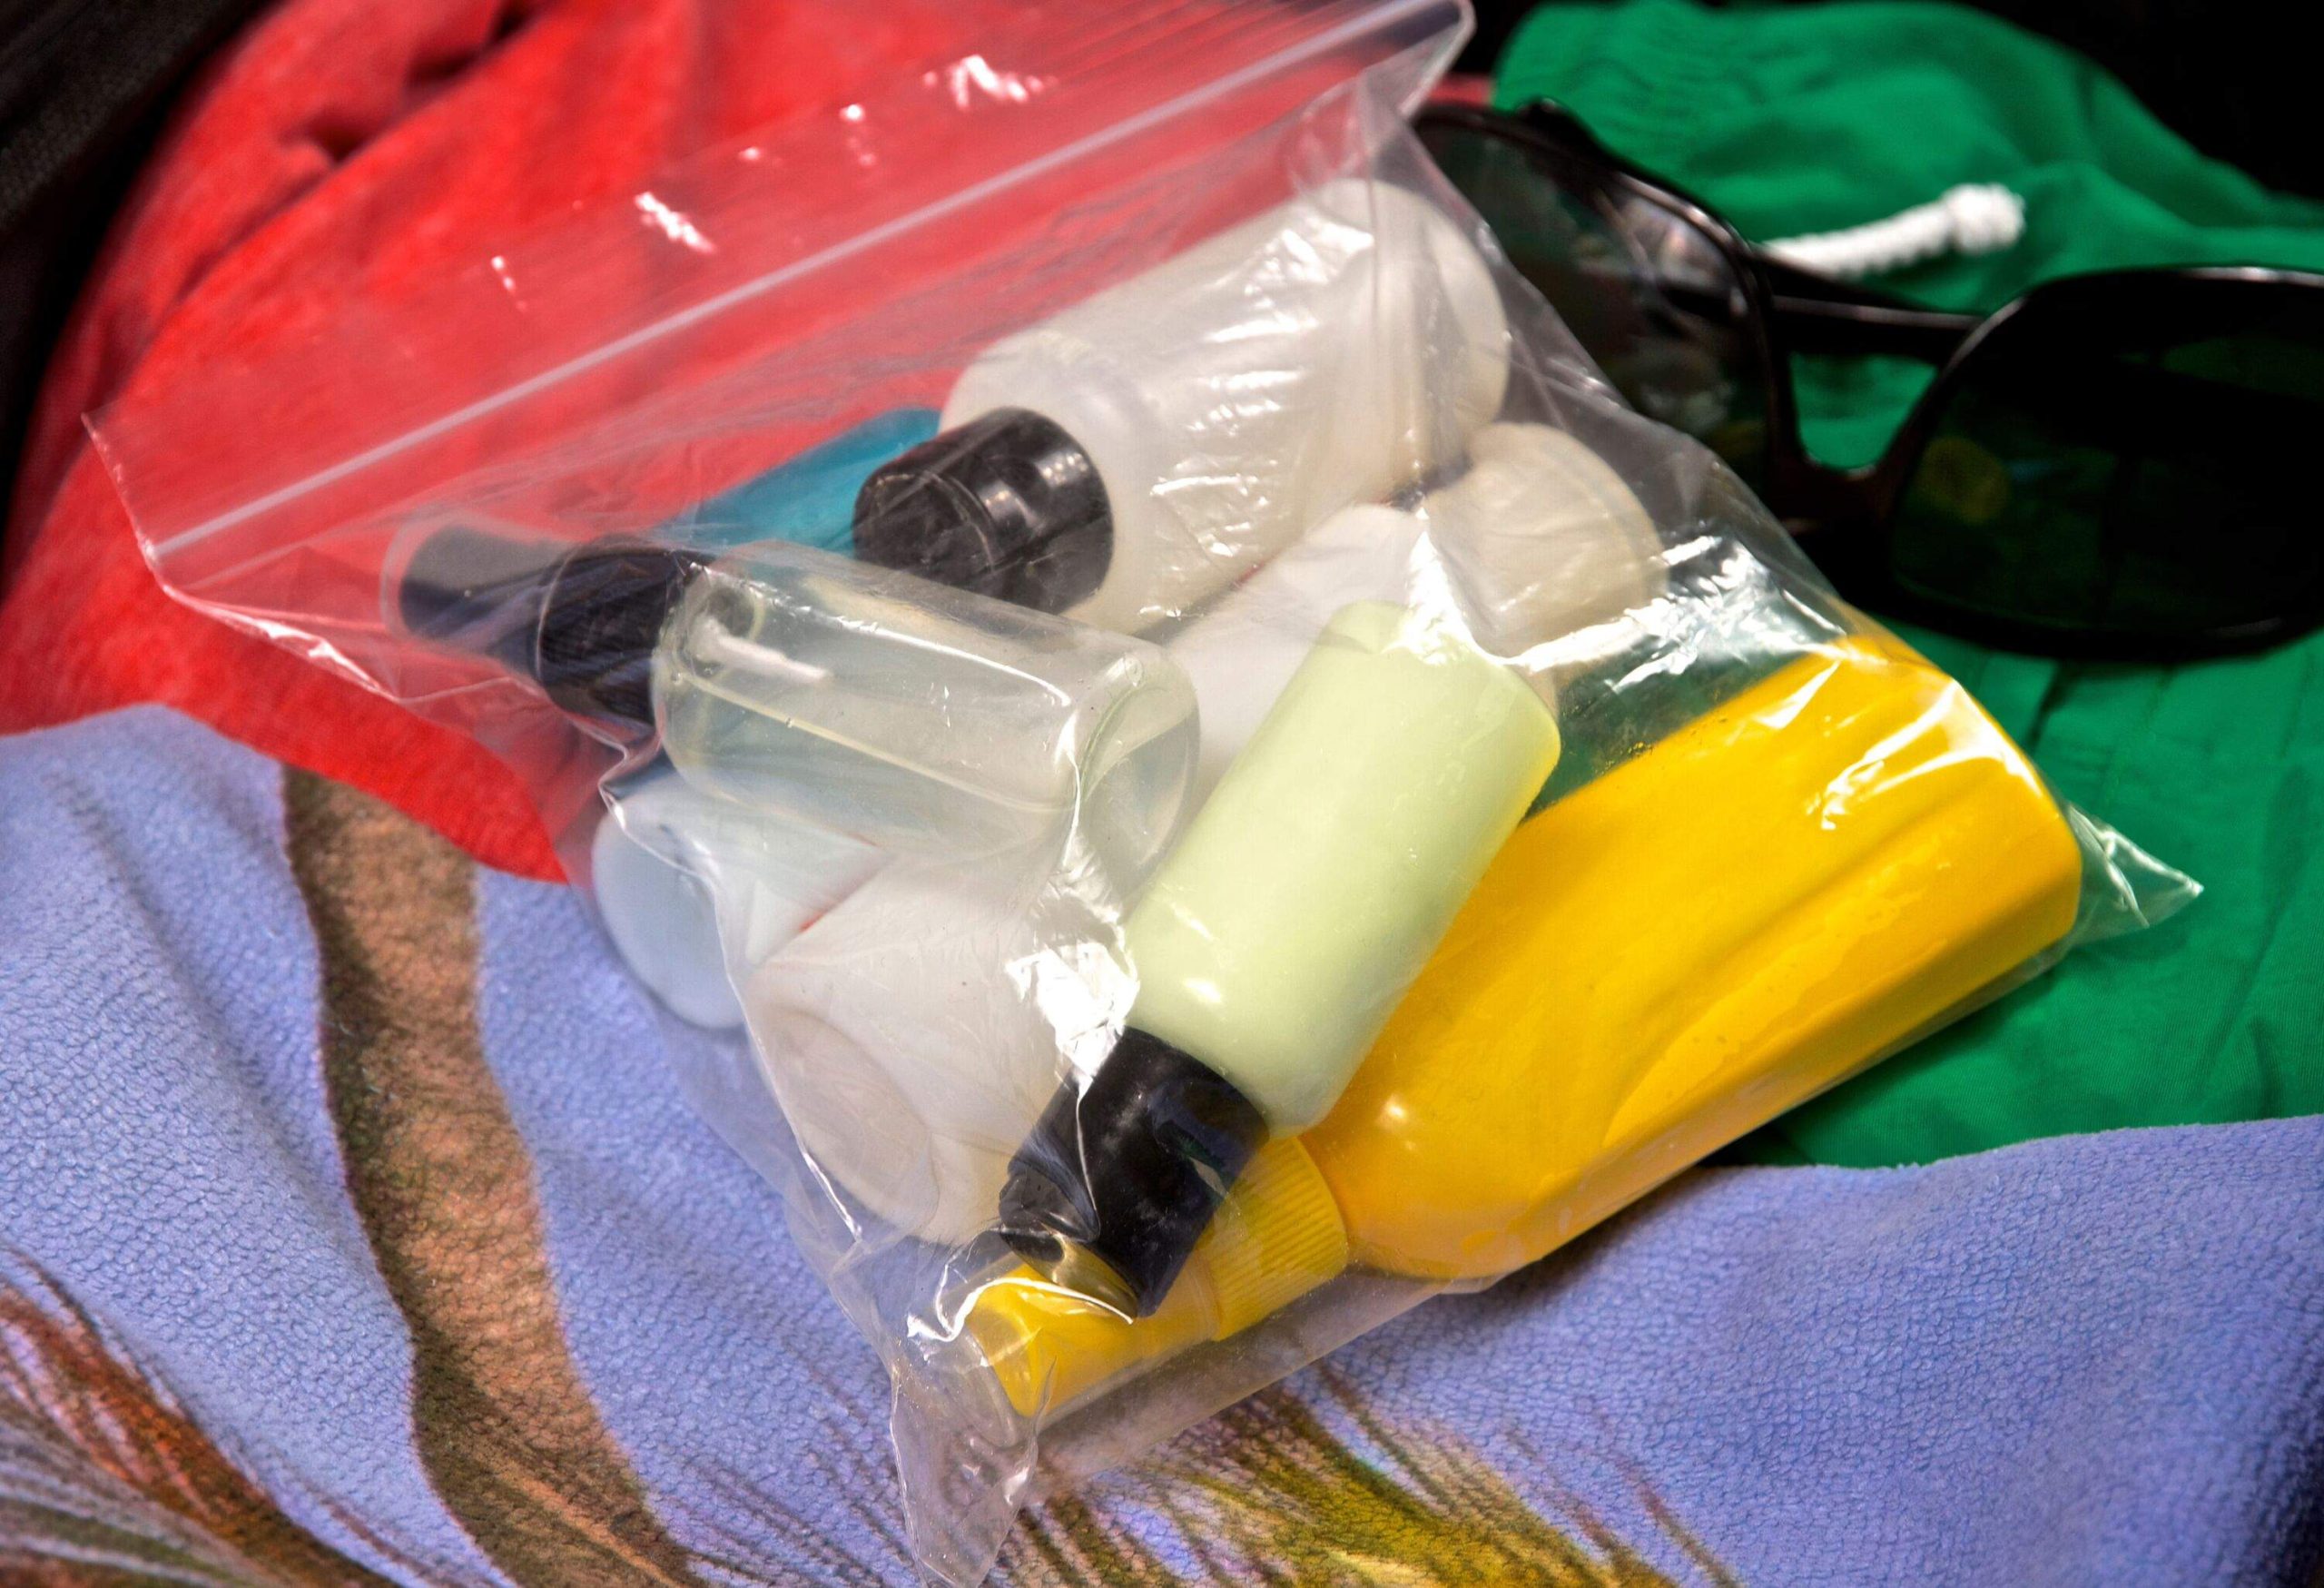 Regulations for hand luggage liquids permitted on flights originating within the European Union which have to be presented at security control. Plastic bags for hand baggage containing liquids need to be in a re-sealable, clear and transparent bag and have a maximum volume of 1 litre.